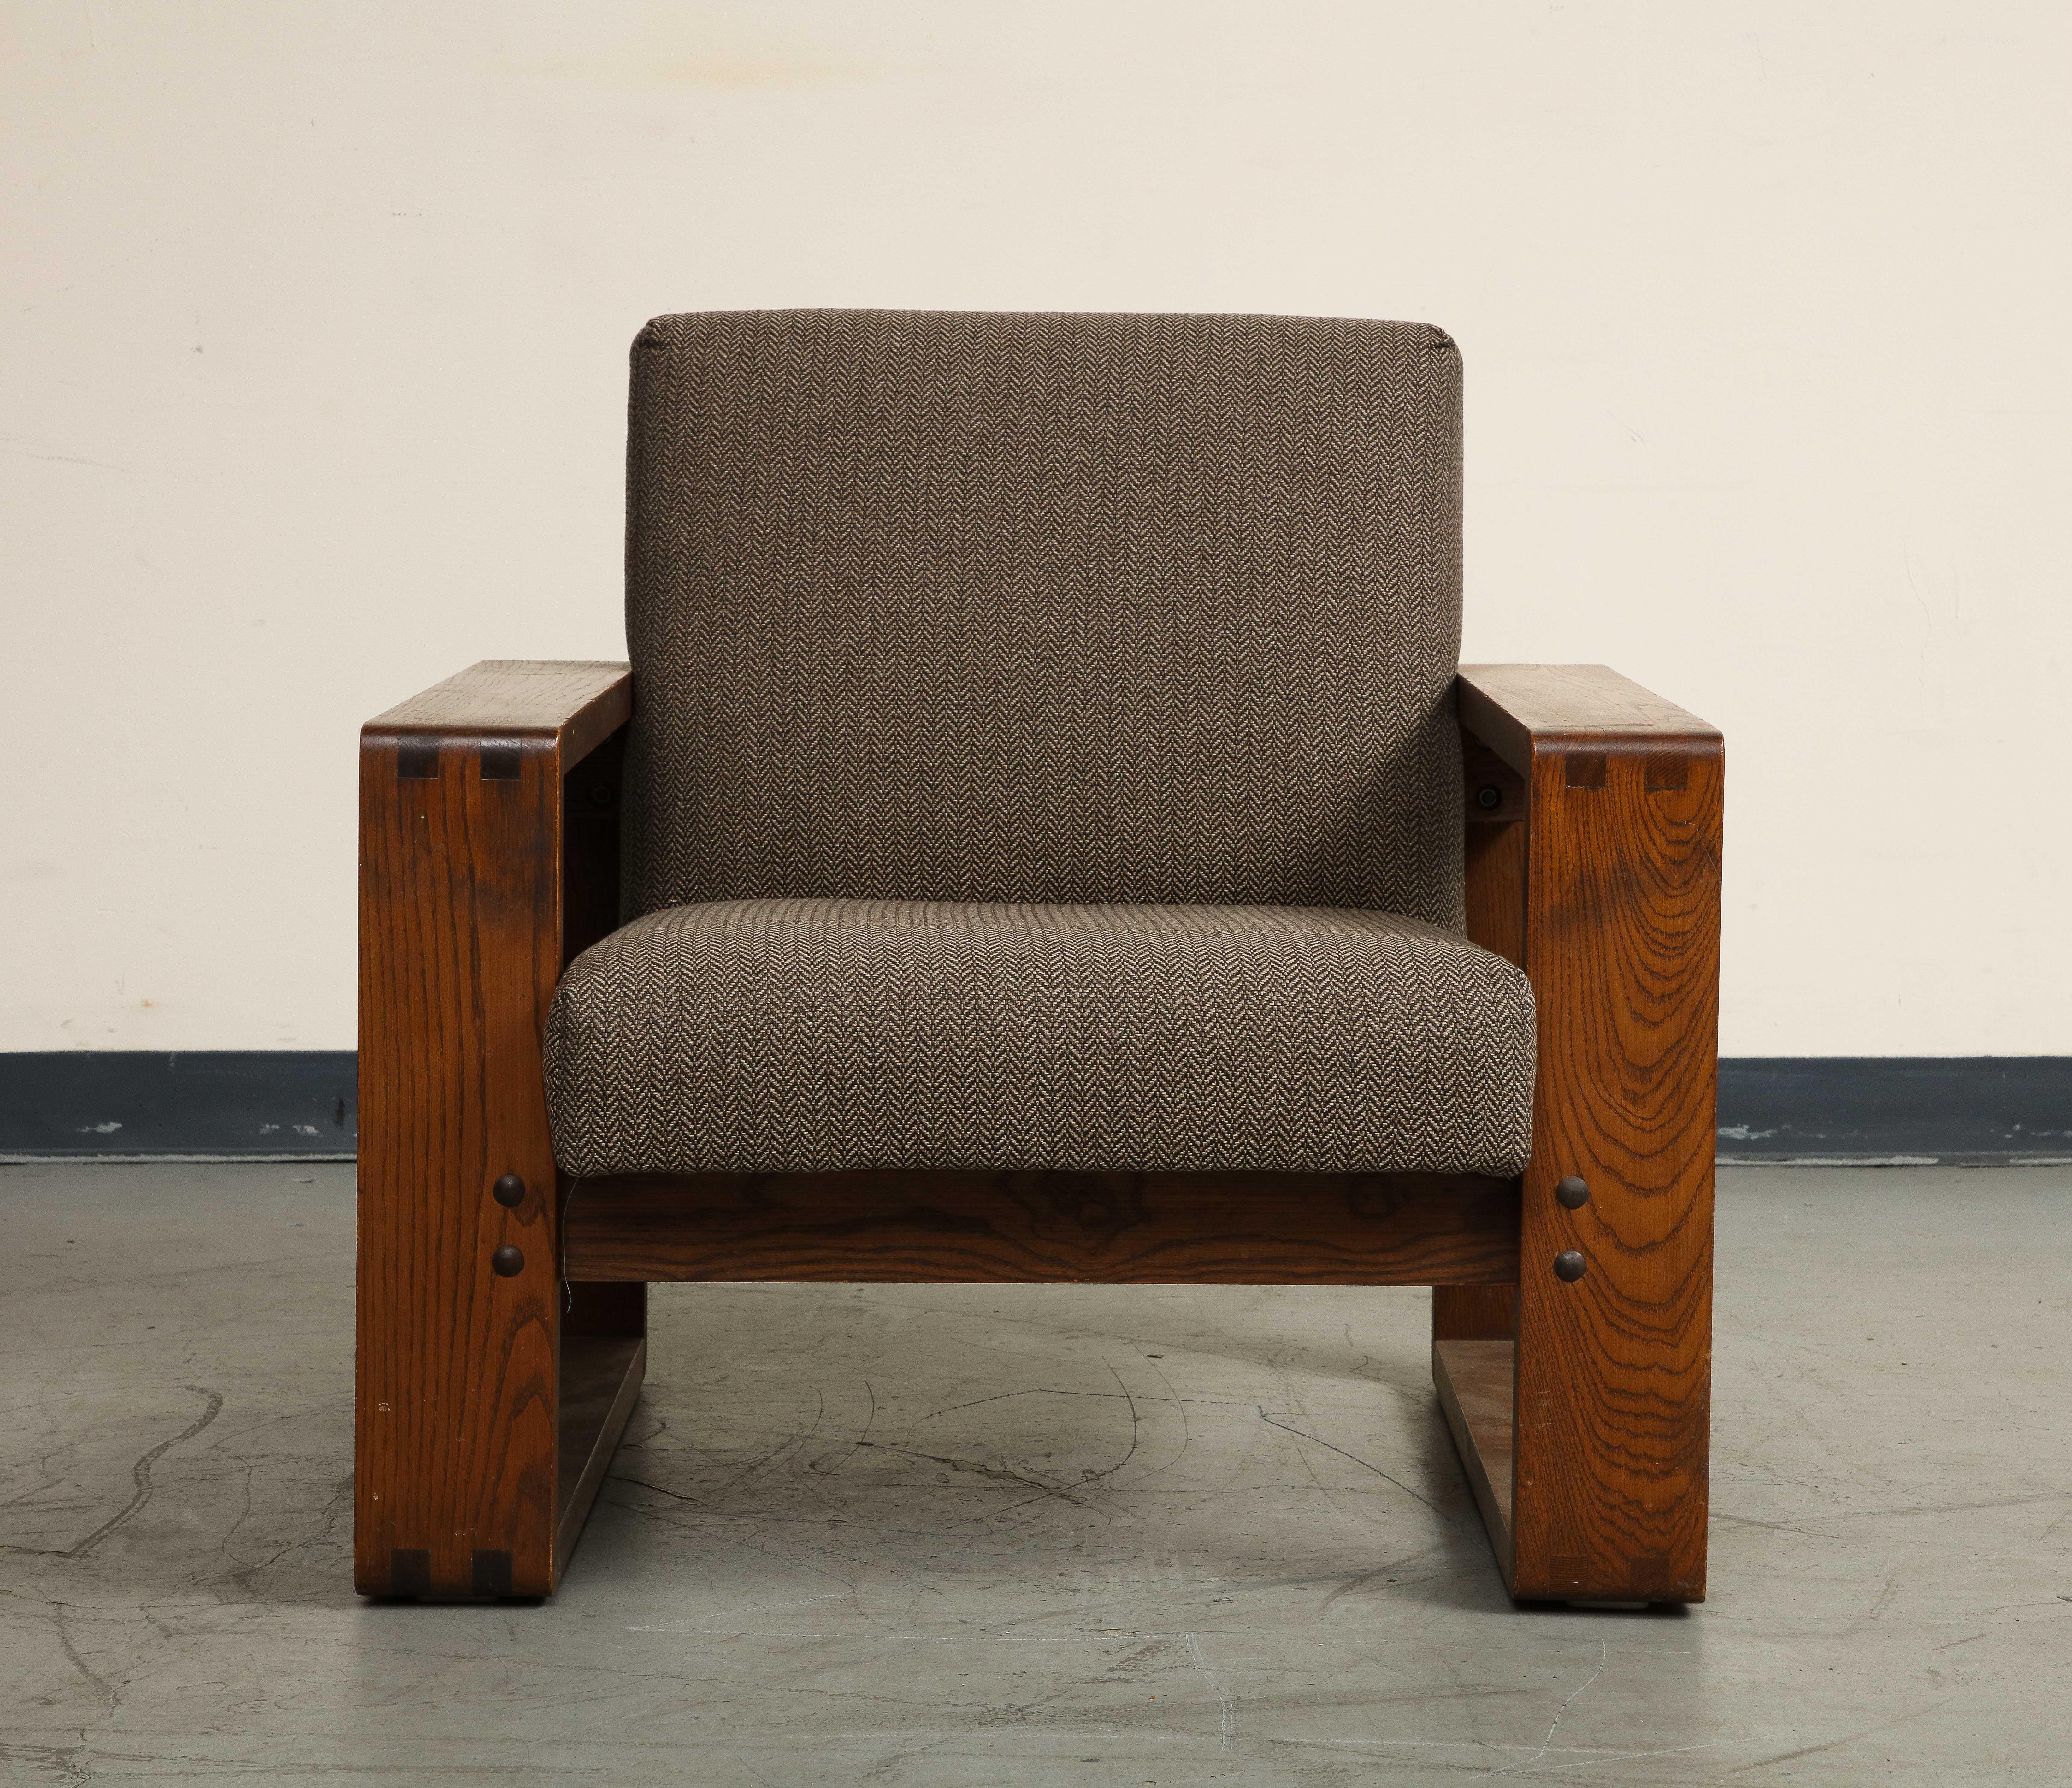 Midcentury American oak lounge chair by Hans Krieks, circa 1970s. Handsome herringbone upholstery, newly done in 2022 and not used since. The upholstered back and seat sit comfortably within the oak frame, flat wood arms are 20.5